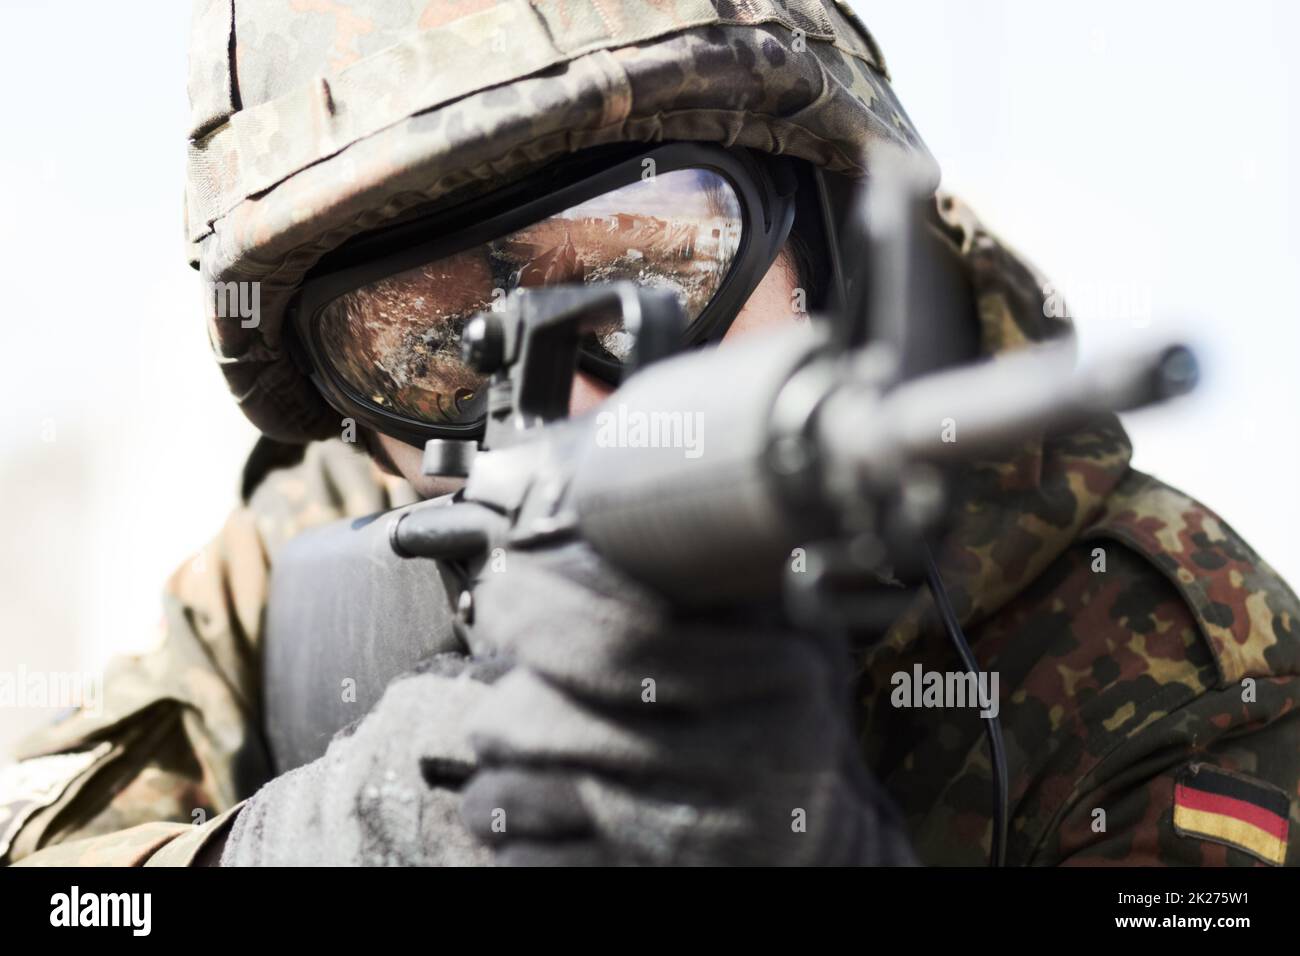 Serving his country. Close up of a german soldier pointing his gun ready to fire. Stock Photo